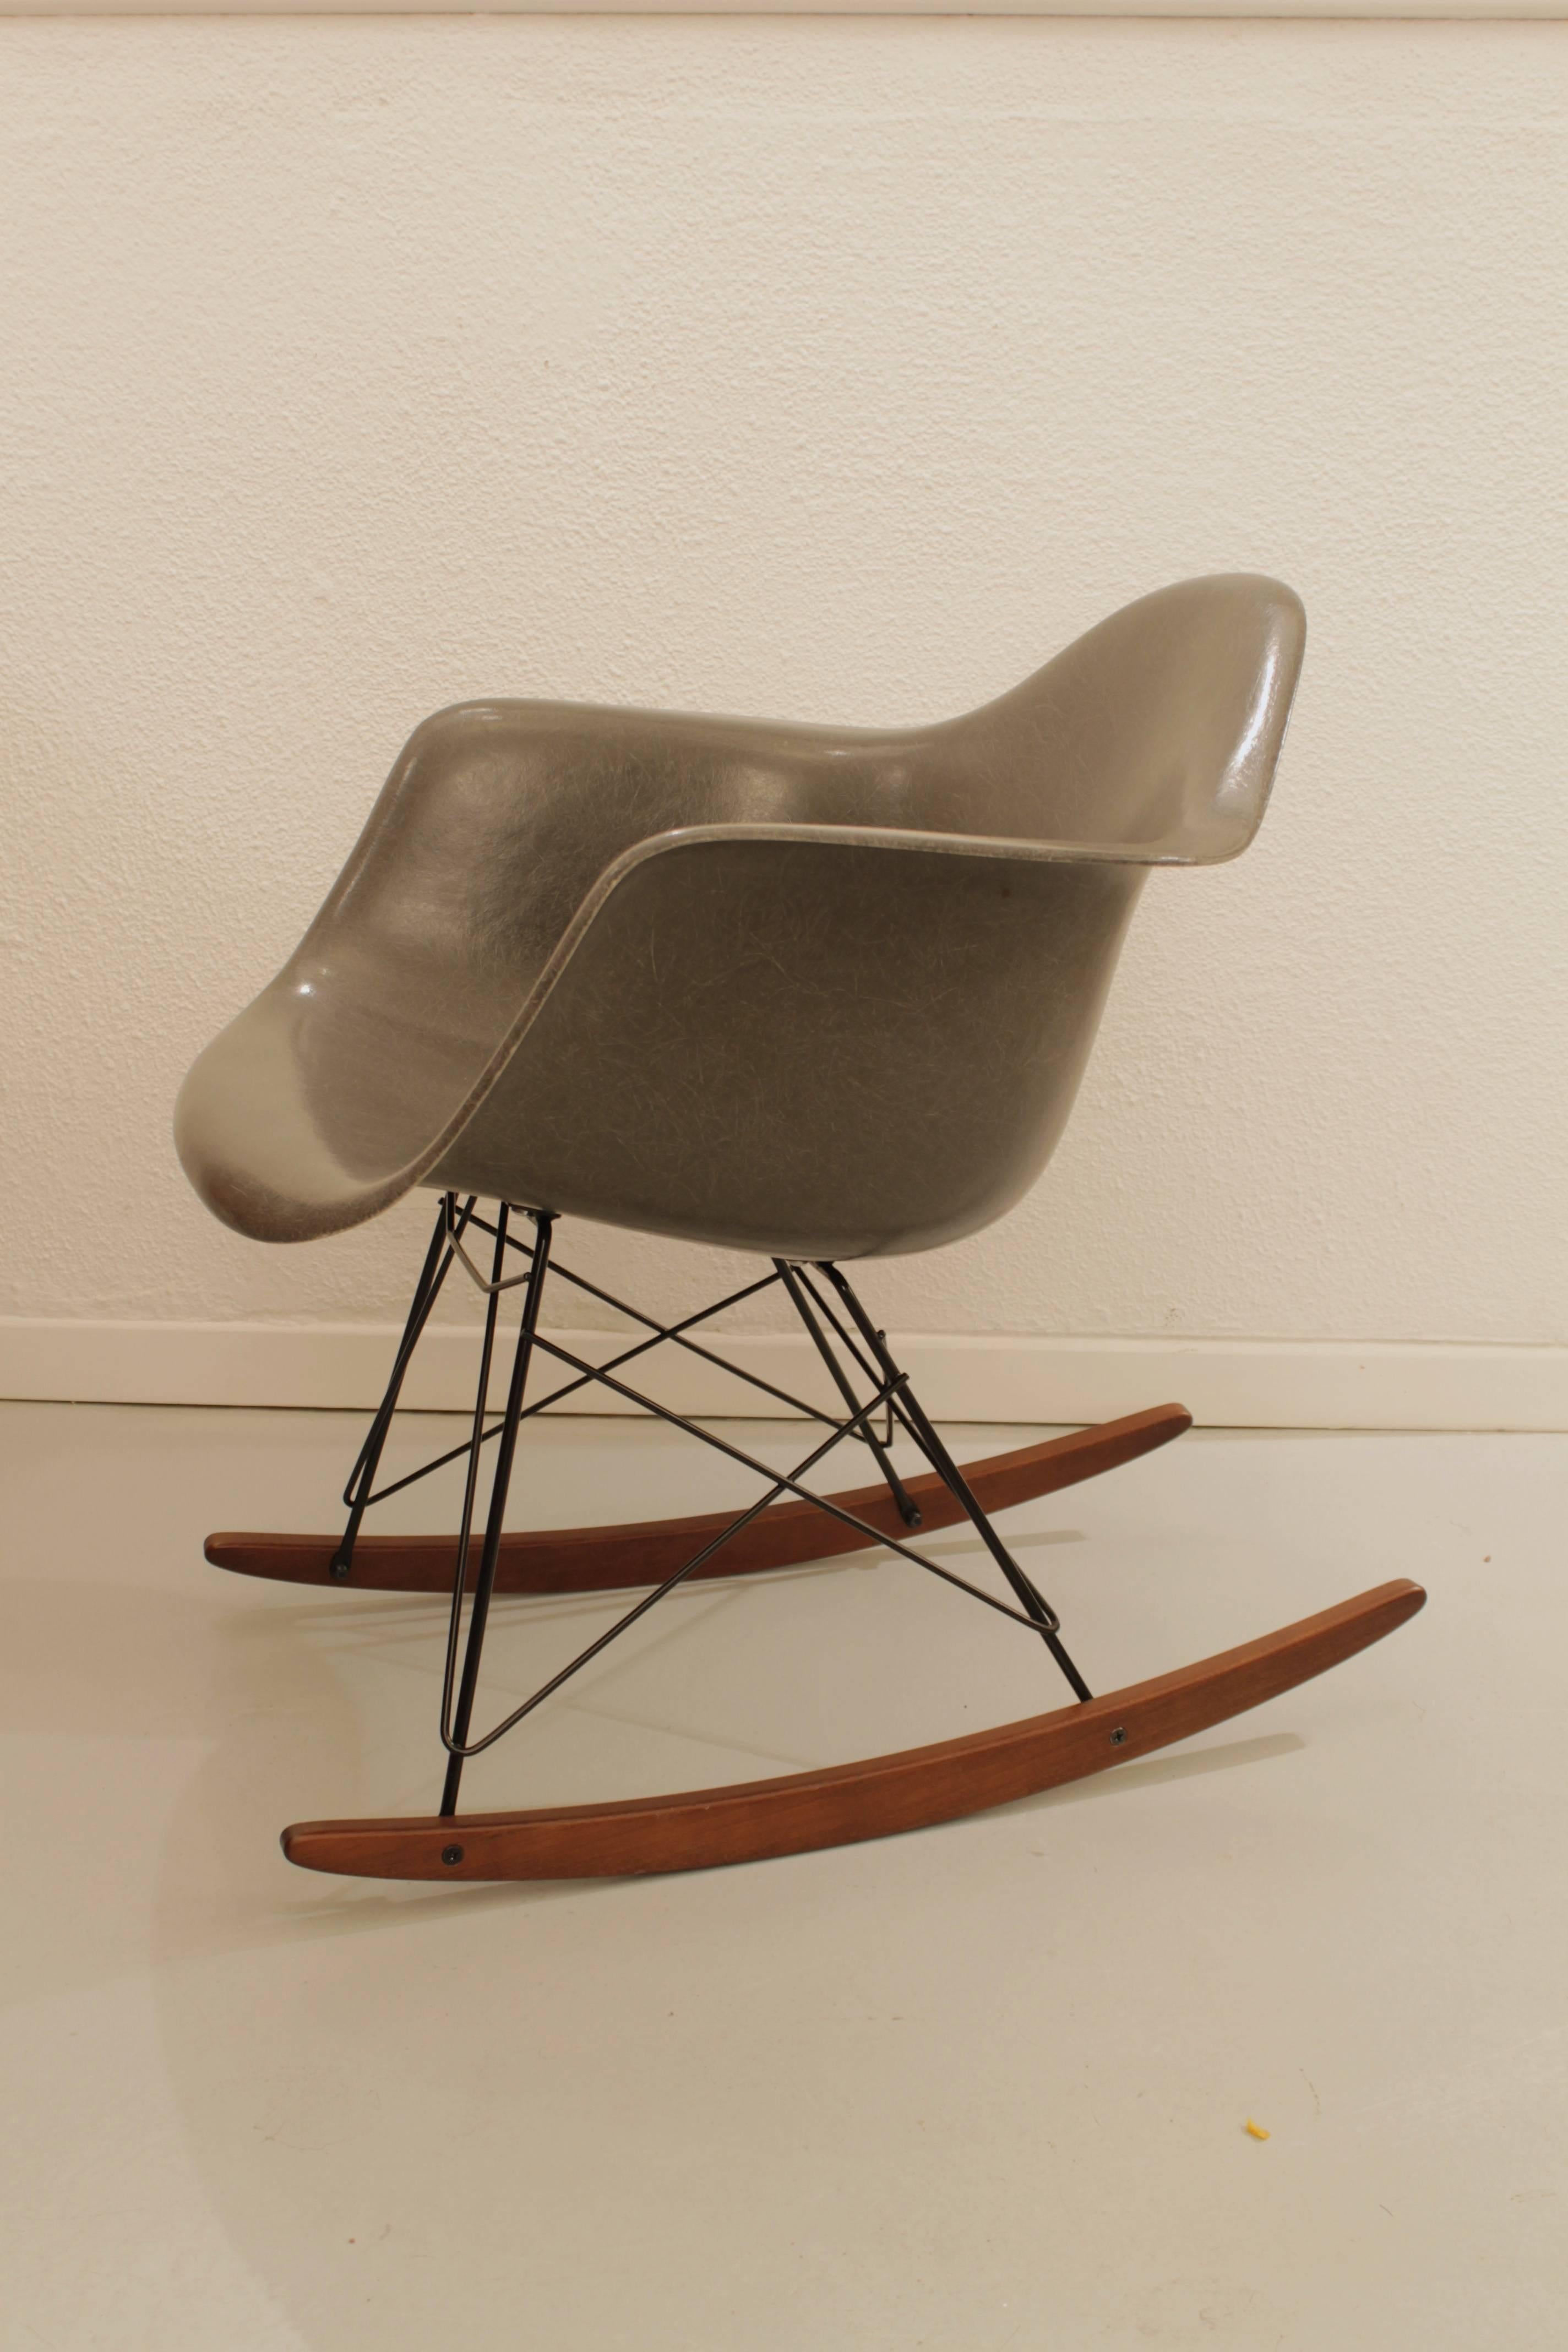 Charles and Ray Eames elephant grey rocking chair
Herman Miller production
New solid walnut base
Perfect condition